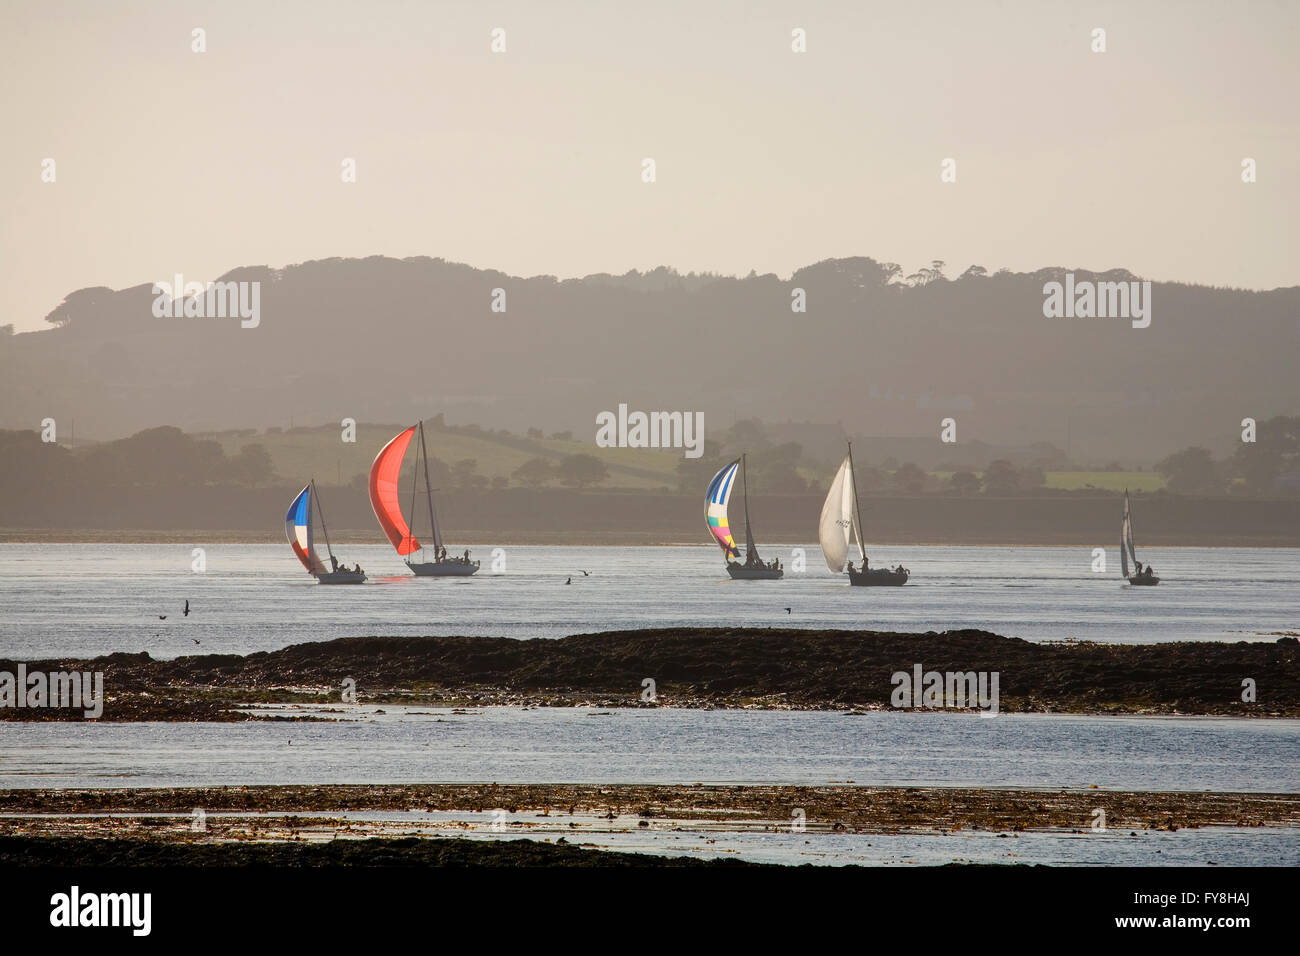 Sunsetwith whisky glass, from waterside house, Strangford Lough, Co Down, Northern Ireland Stock Photo